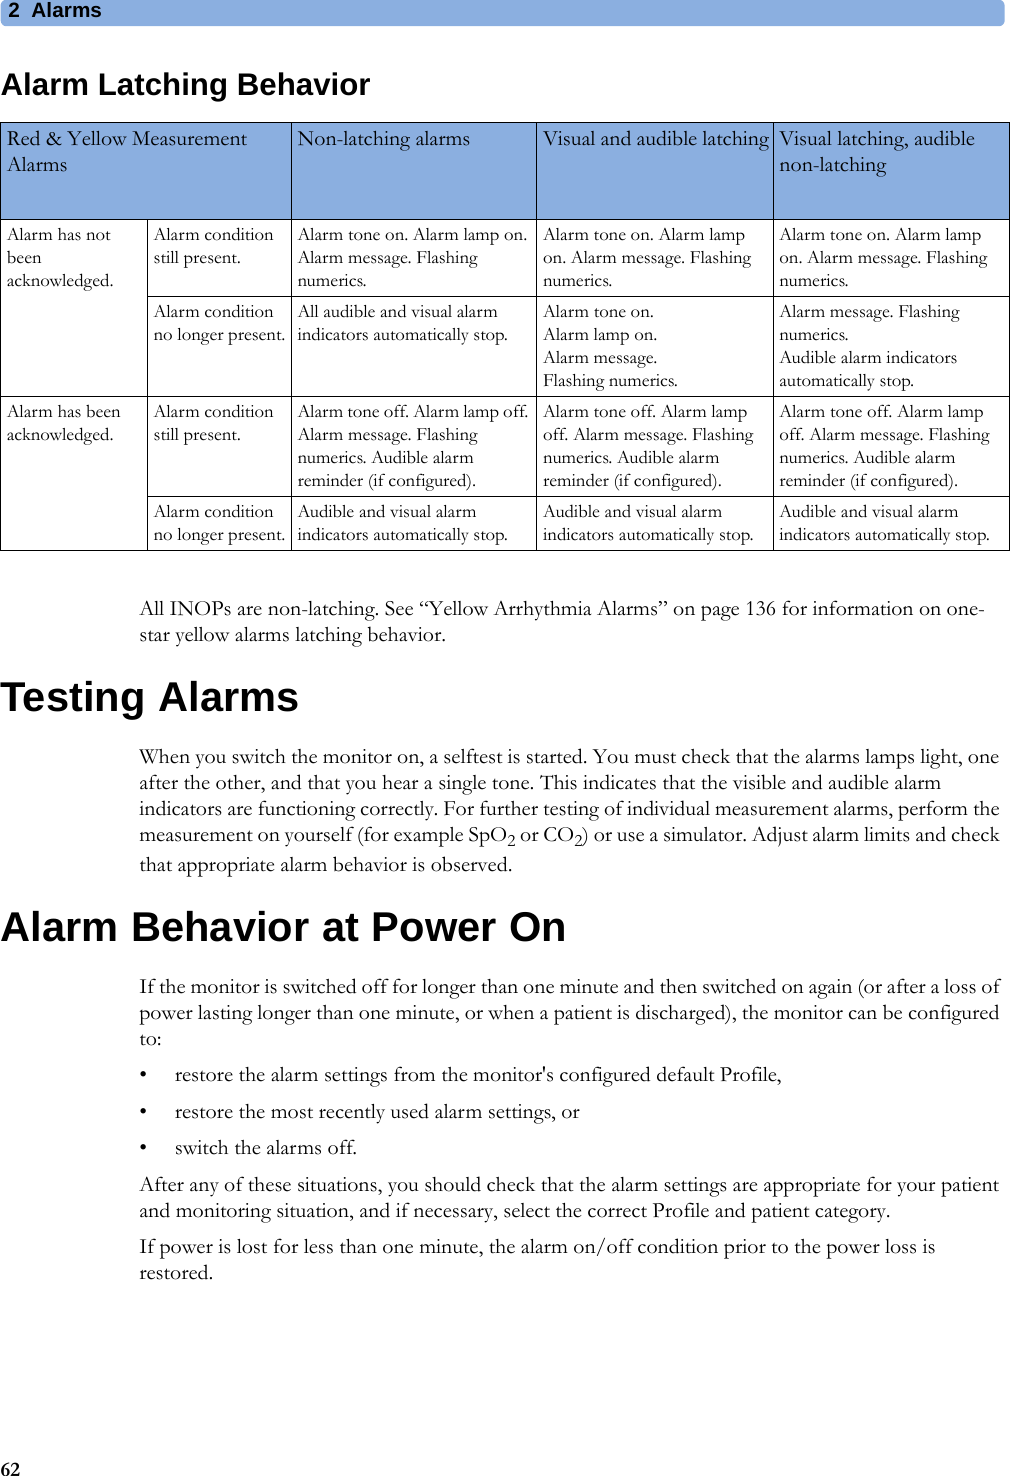 2 Alarms62Alarm Latching BehaviorAll INOPs are non-latching. See “Yellow Arrhythmia Alarms” on page 136 for information on one-star yellow alarms latching behavior.Testing AlarmsWhen you switch the monitor on, a selftest is started. You must check that the alarms lamps light, one after the other, and that you hear a single tone. This indicates that the visible and audible alarm indicators are functioning correctly. For further testing of individual measurement alarms, perform the measurement on yourself (for example SpO2 or CO2) or use a simulator. Adjust alarm limits and check that appropriate alarm behavior is observed.Alarm Behavior at Power OnIf the monitor is switched off for longer than one minute and then switched on again (or after a loss of power lasting longer than one minute, or when a patient is discharged), the monitor can be configured to:• restore the alarm settings from the monitor&apos;s configured default Profile,• restore the most recently used alarm settings, or • switch the alarms off. After any of these situations, you should check that the alarm settings are appropriate for your patient and monitoring situation, and if necessary, select the correct Profile and patient category.If power is lost for less than one minute, the alarm on/off condition prior to the power loss is restored.Red &amp; Yellow Measurement AlarmsNon-latching alarms Visual and audible latching Visual latching, audible non-latchingAlarm has not been acknowledged.Alarm condition still present.Alarm tone on. Alarm lamp on. Alarm message. Flashing numerics.Alarm tone on. Alarm lamp on. Alarm message. Flashing numerics.Alarm tone on. Alarm lamp on. Alarm message. Flashing numerics.Alarm condition no longer present.All audible and visual alarm indicators automatically stop.Alarm tone on.Alarm lamp on. Alarm message. Flashing numerics.Alarm message. Flashing numerics.Audible alarm indicators automatically stop.Alarm has been acknowledged.Alarm condition still present.Alarm tone off. Alarm lamp off. Alarm message. Flashing numerics. Audible alarm reminder (if configured).Alarm tone off. Alarm lamp off. Alarm message. Flashing numerics. Audible alarm reminder (if configured).Alarm tone off. Alarm lamp off. Alarm message. Flashing numerics. Audible alarm reminder (if configured).Alarm condition no longer present.Audible and visual alarm indicators automatically stop.Audible and visual alarm indicators automatically stop.Audible and visual alarm indicators automatically stop.